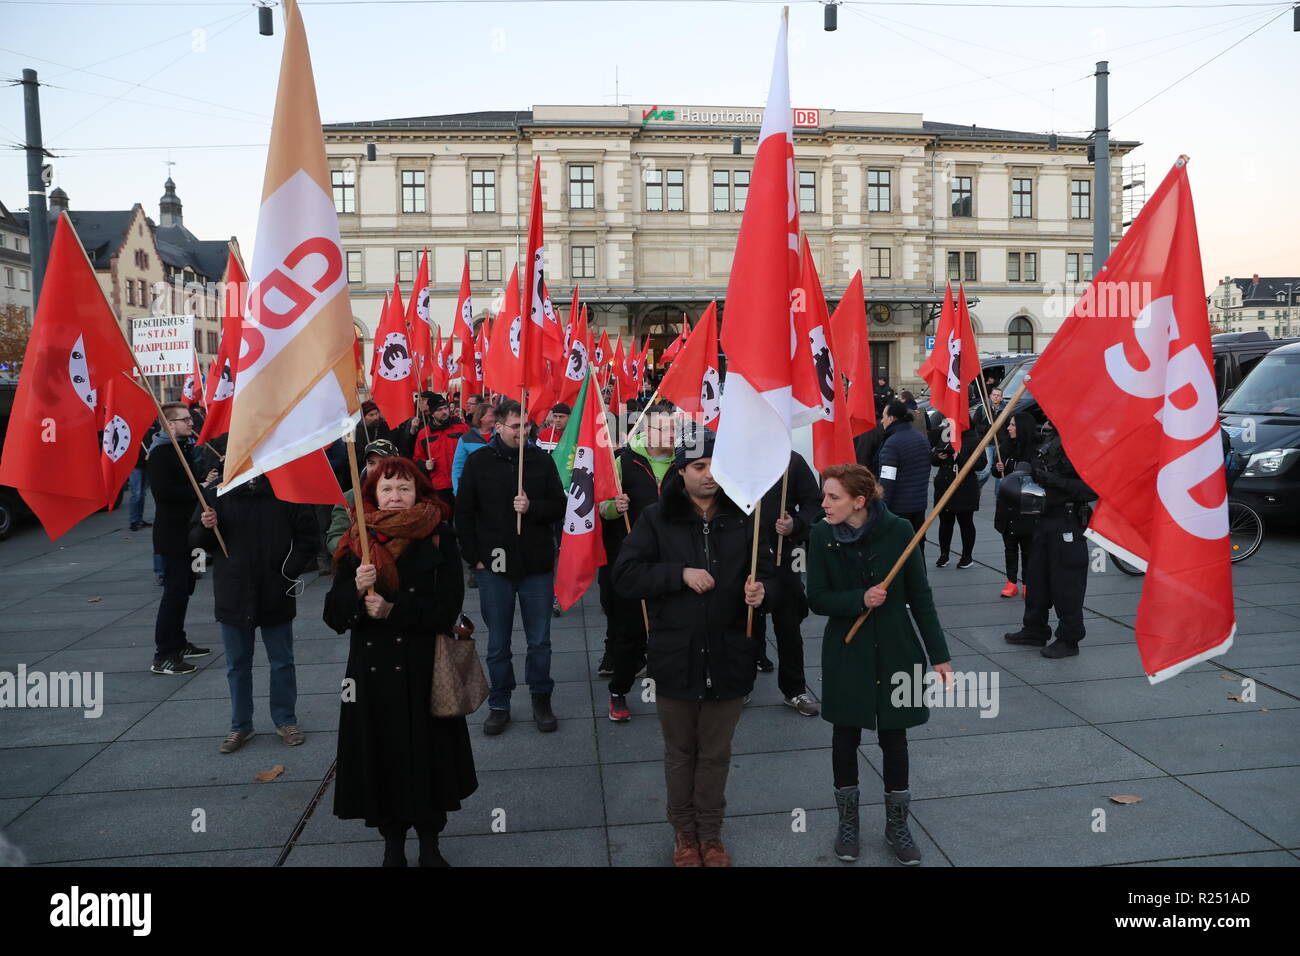 Chemnitz, Germany. 16th Nov, 2018. Participants of a right rally announced by the 'Merkeljugend' carry banners and flags with the logo of the SPD and the CDU. At this moment Merkel (CDU) is attending the training of the junior teams of the second division basketball team Niners Chemnitz. A meeting with citizens is then scheduled. The Chancellor's visit to Chemnitz was prompted by a deadly knife attack on a German about three months ago and subsequent demonstrations with xenophobic attacks. Credit: dpa-Zentralbild/dpa/Alamy Live News Stock Photo